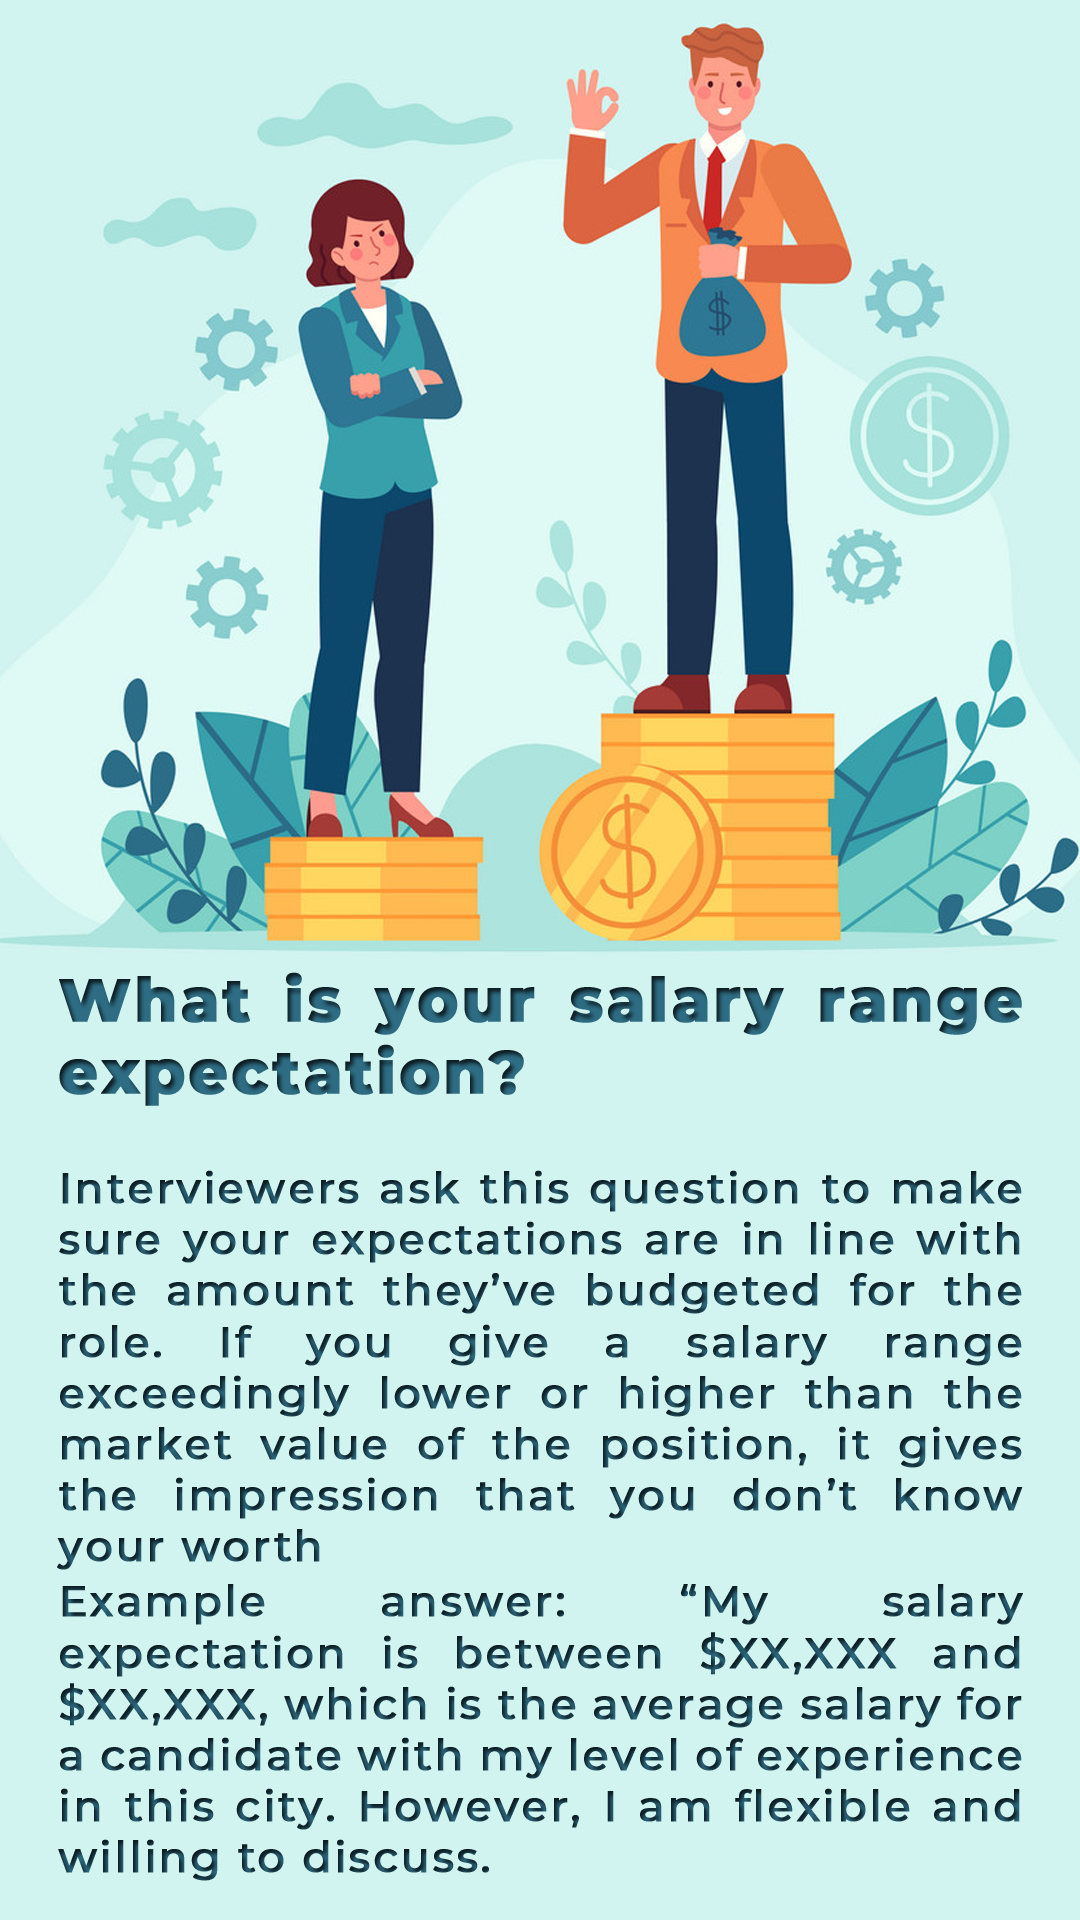 What is your salary range expectation?